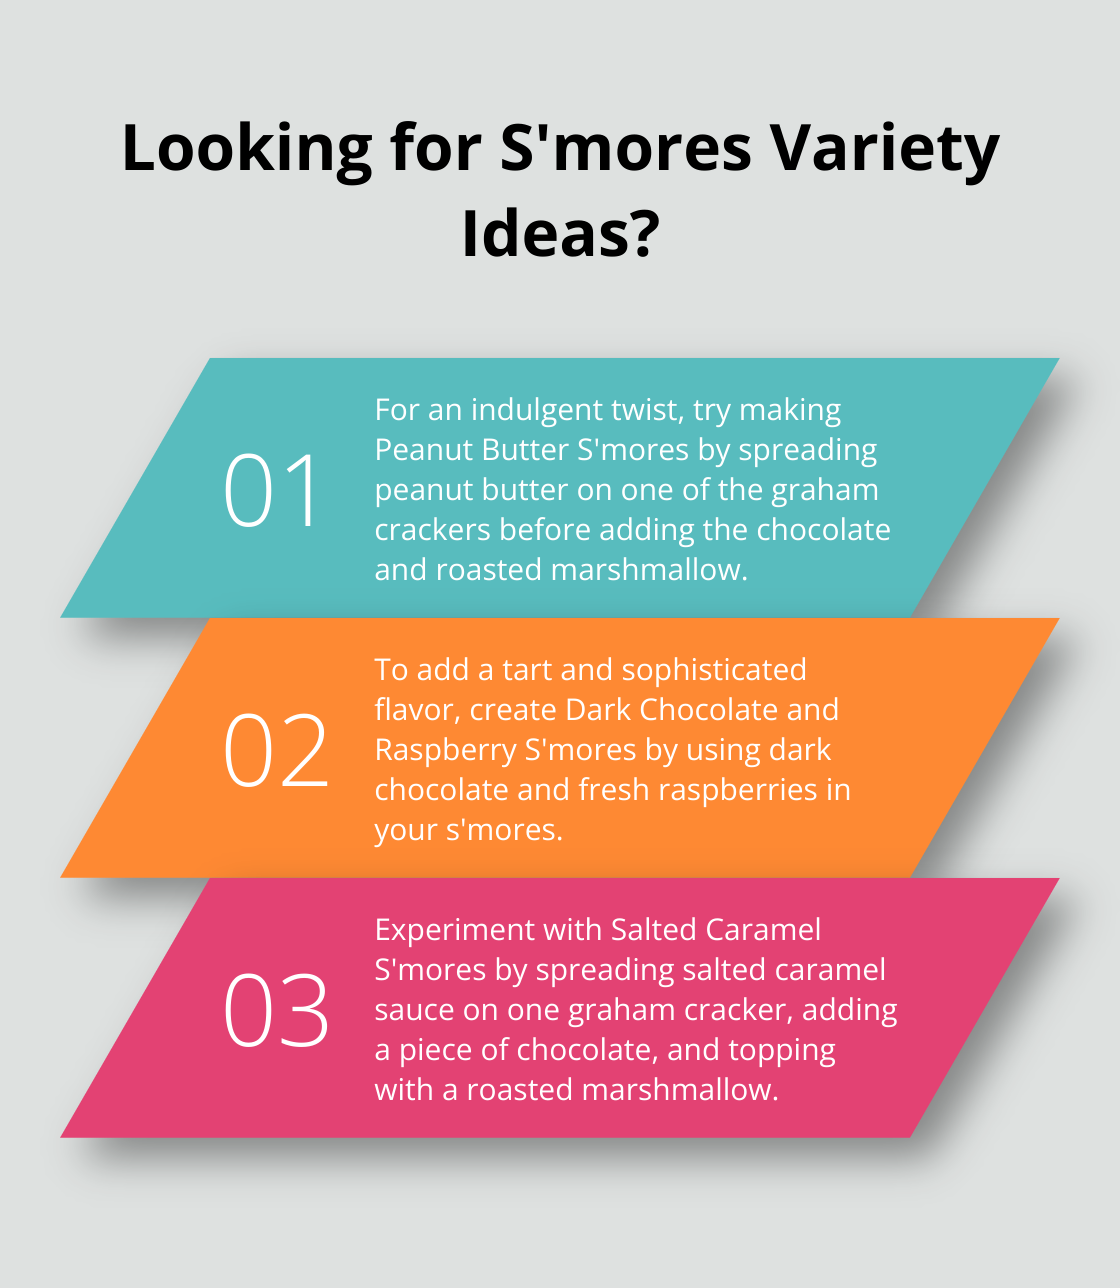 Fact - Looking for S'mores Variety Ideas?